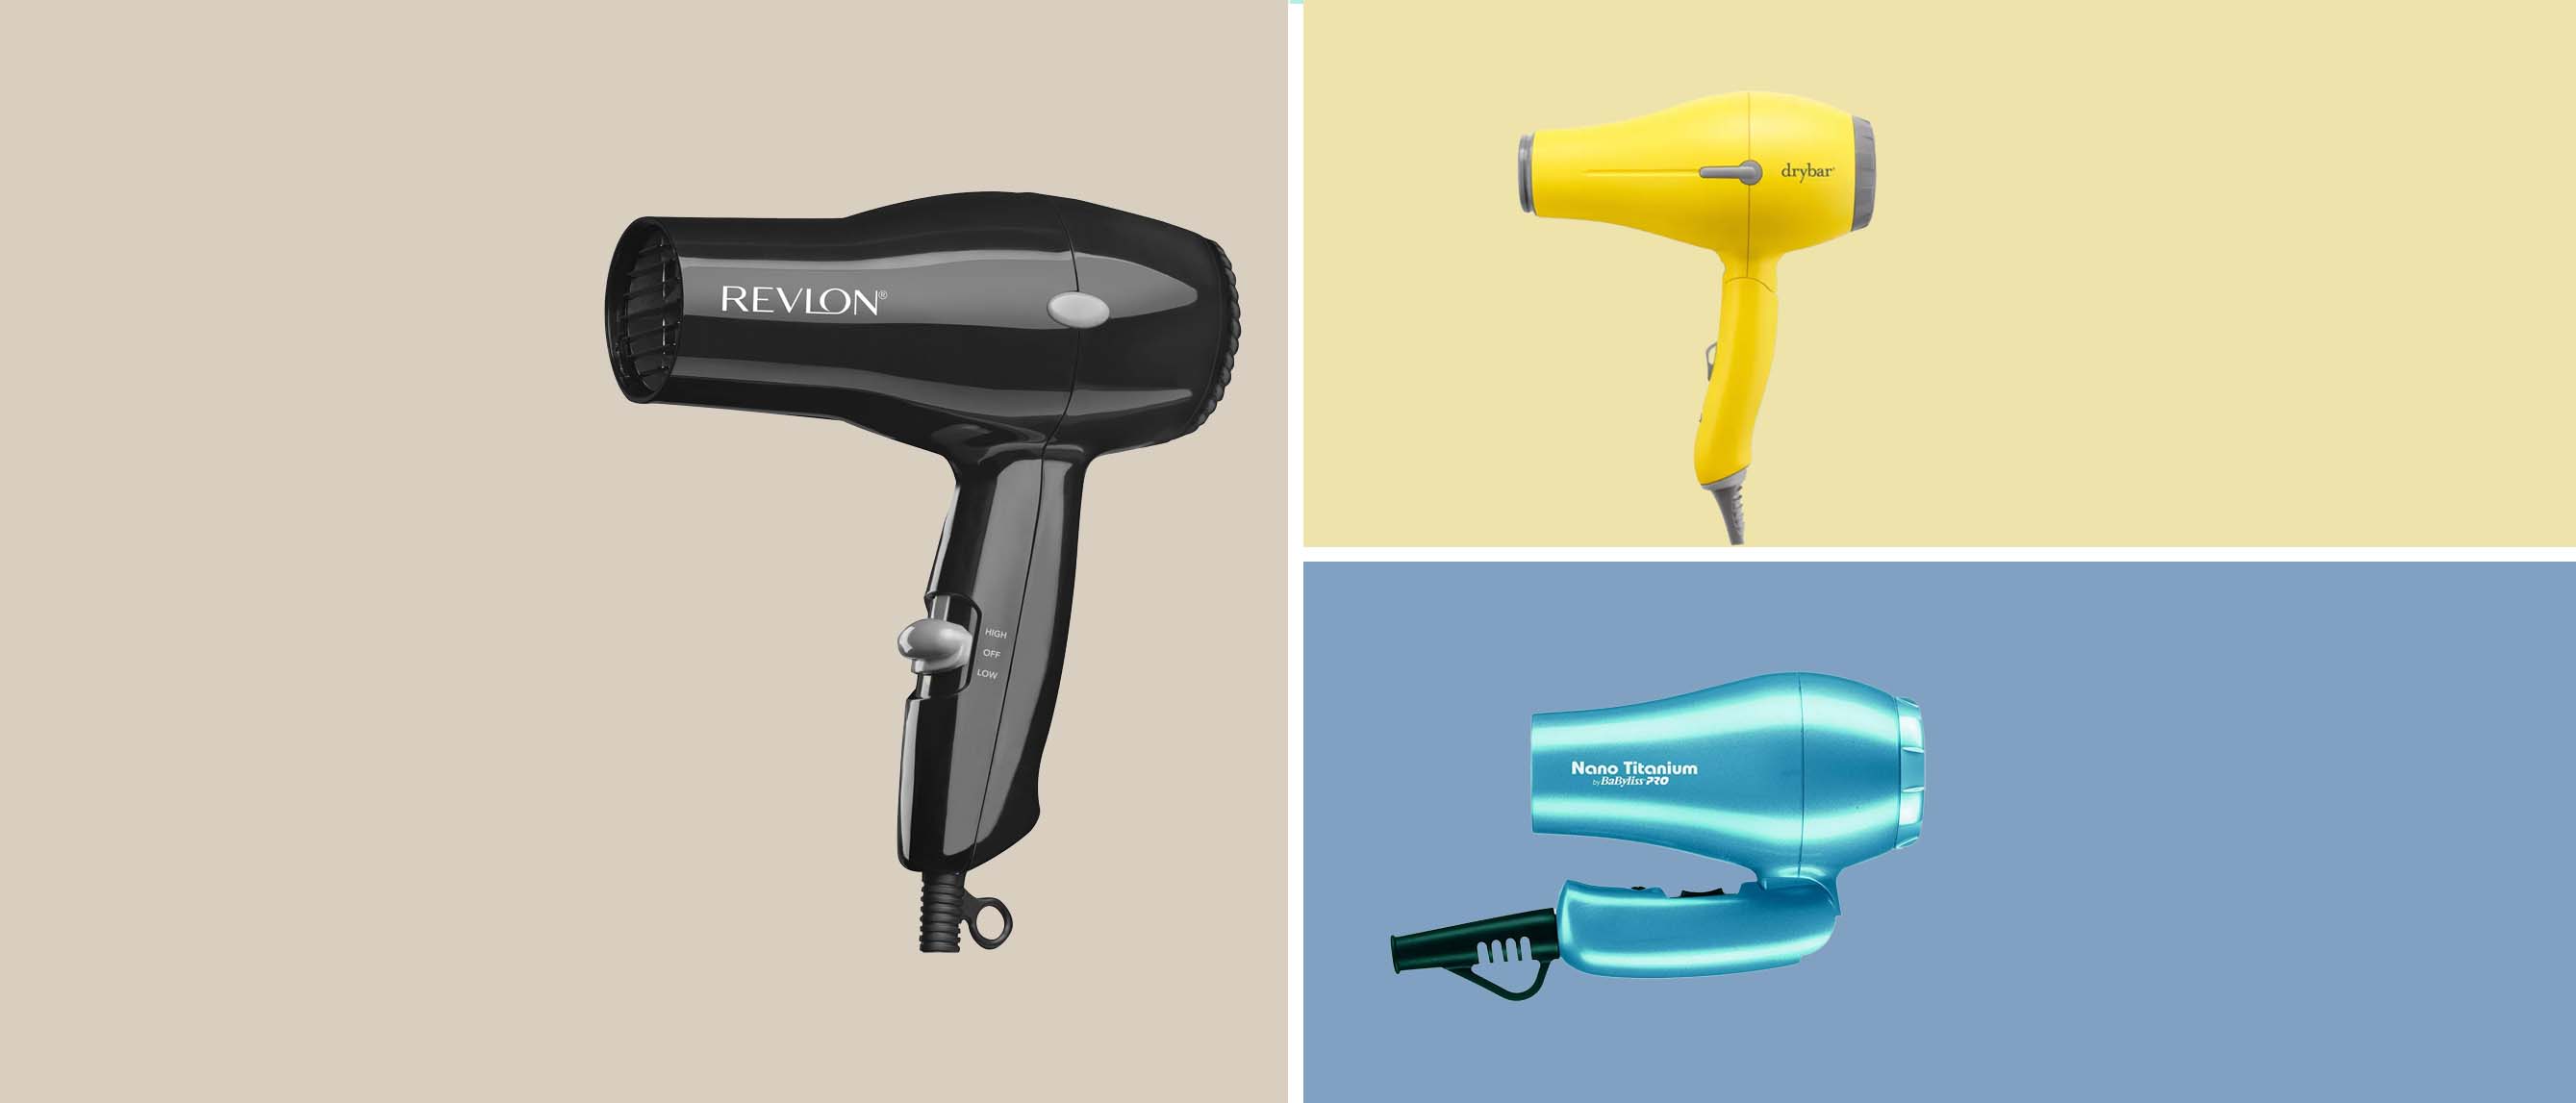 travel hair dryers from revlon, babyliss and more